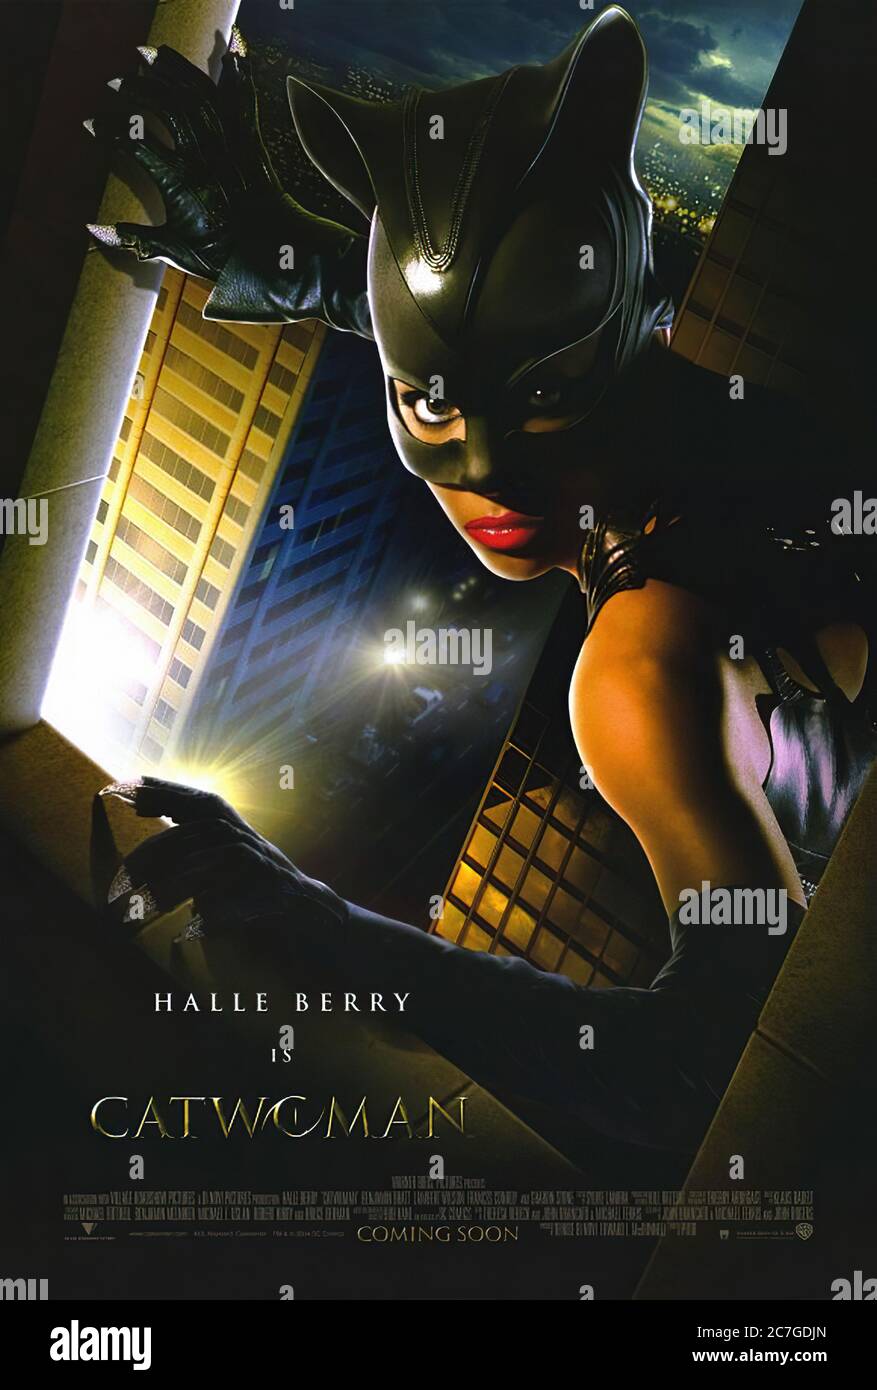 Catwoman - Movie Poster Stock Photo